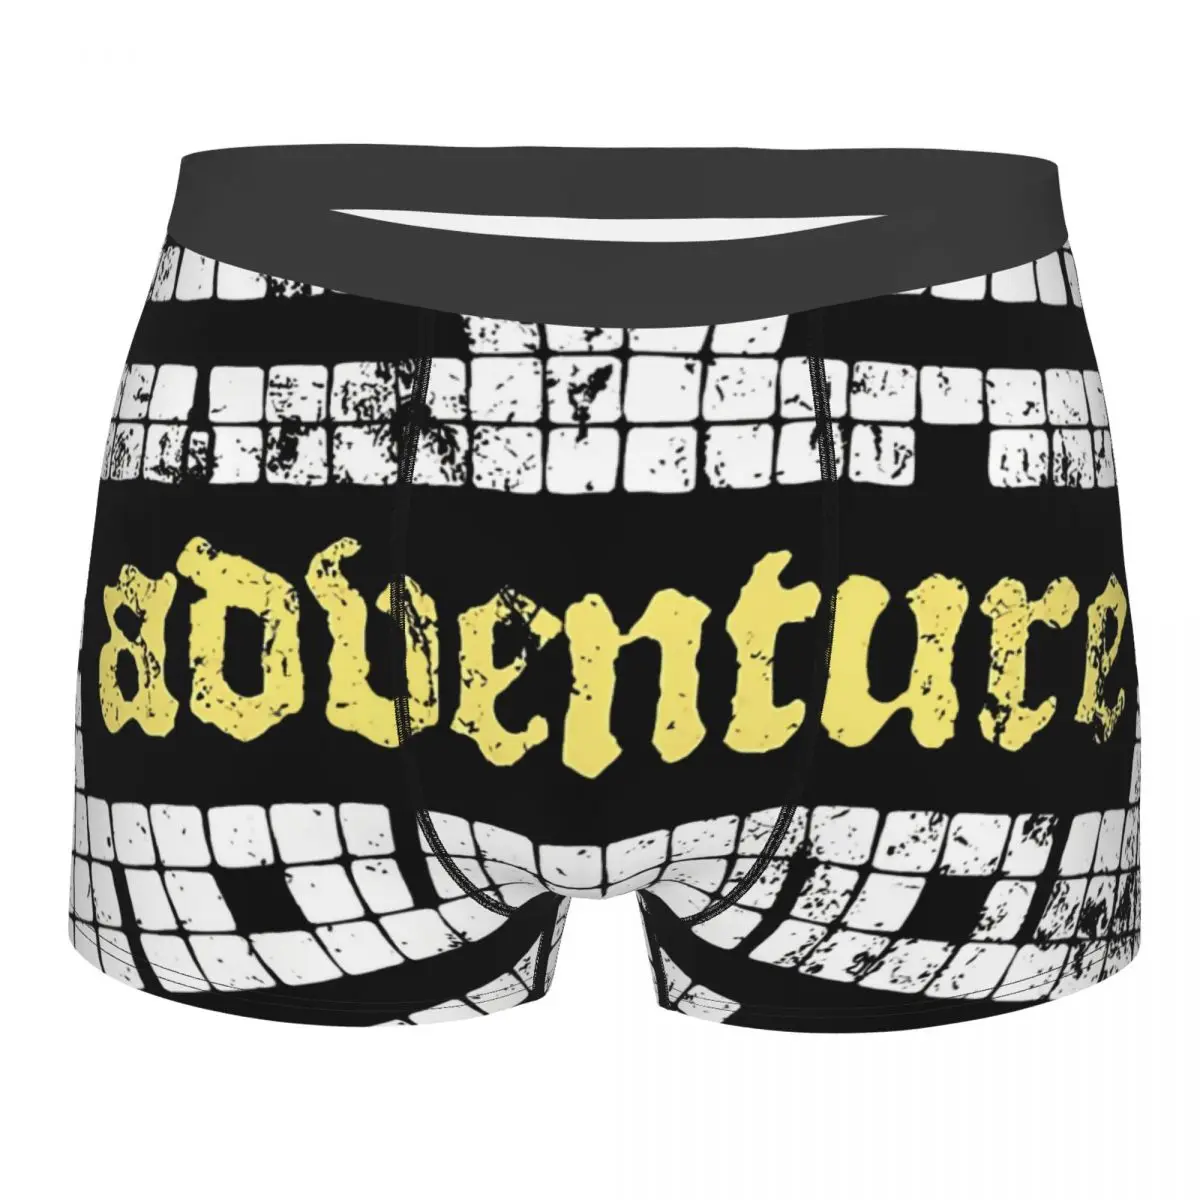 

Dungeon Map Grid Man's Boxer Briefs DnD Game Breathable Creative Underpants High Quality Print Shorts Gift Idea